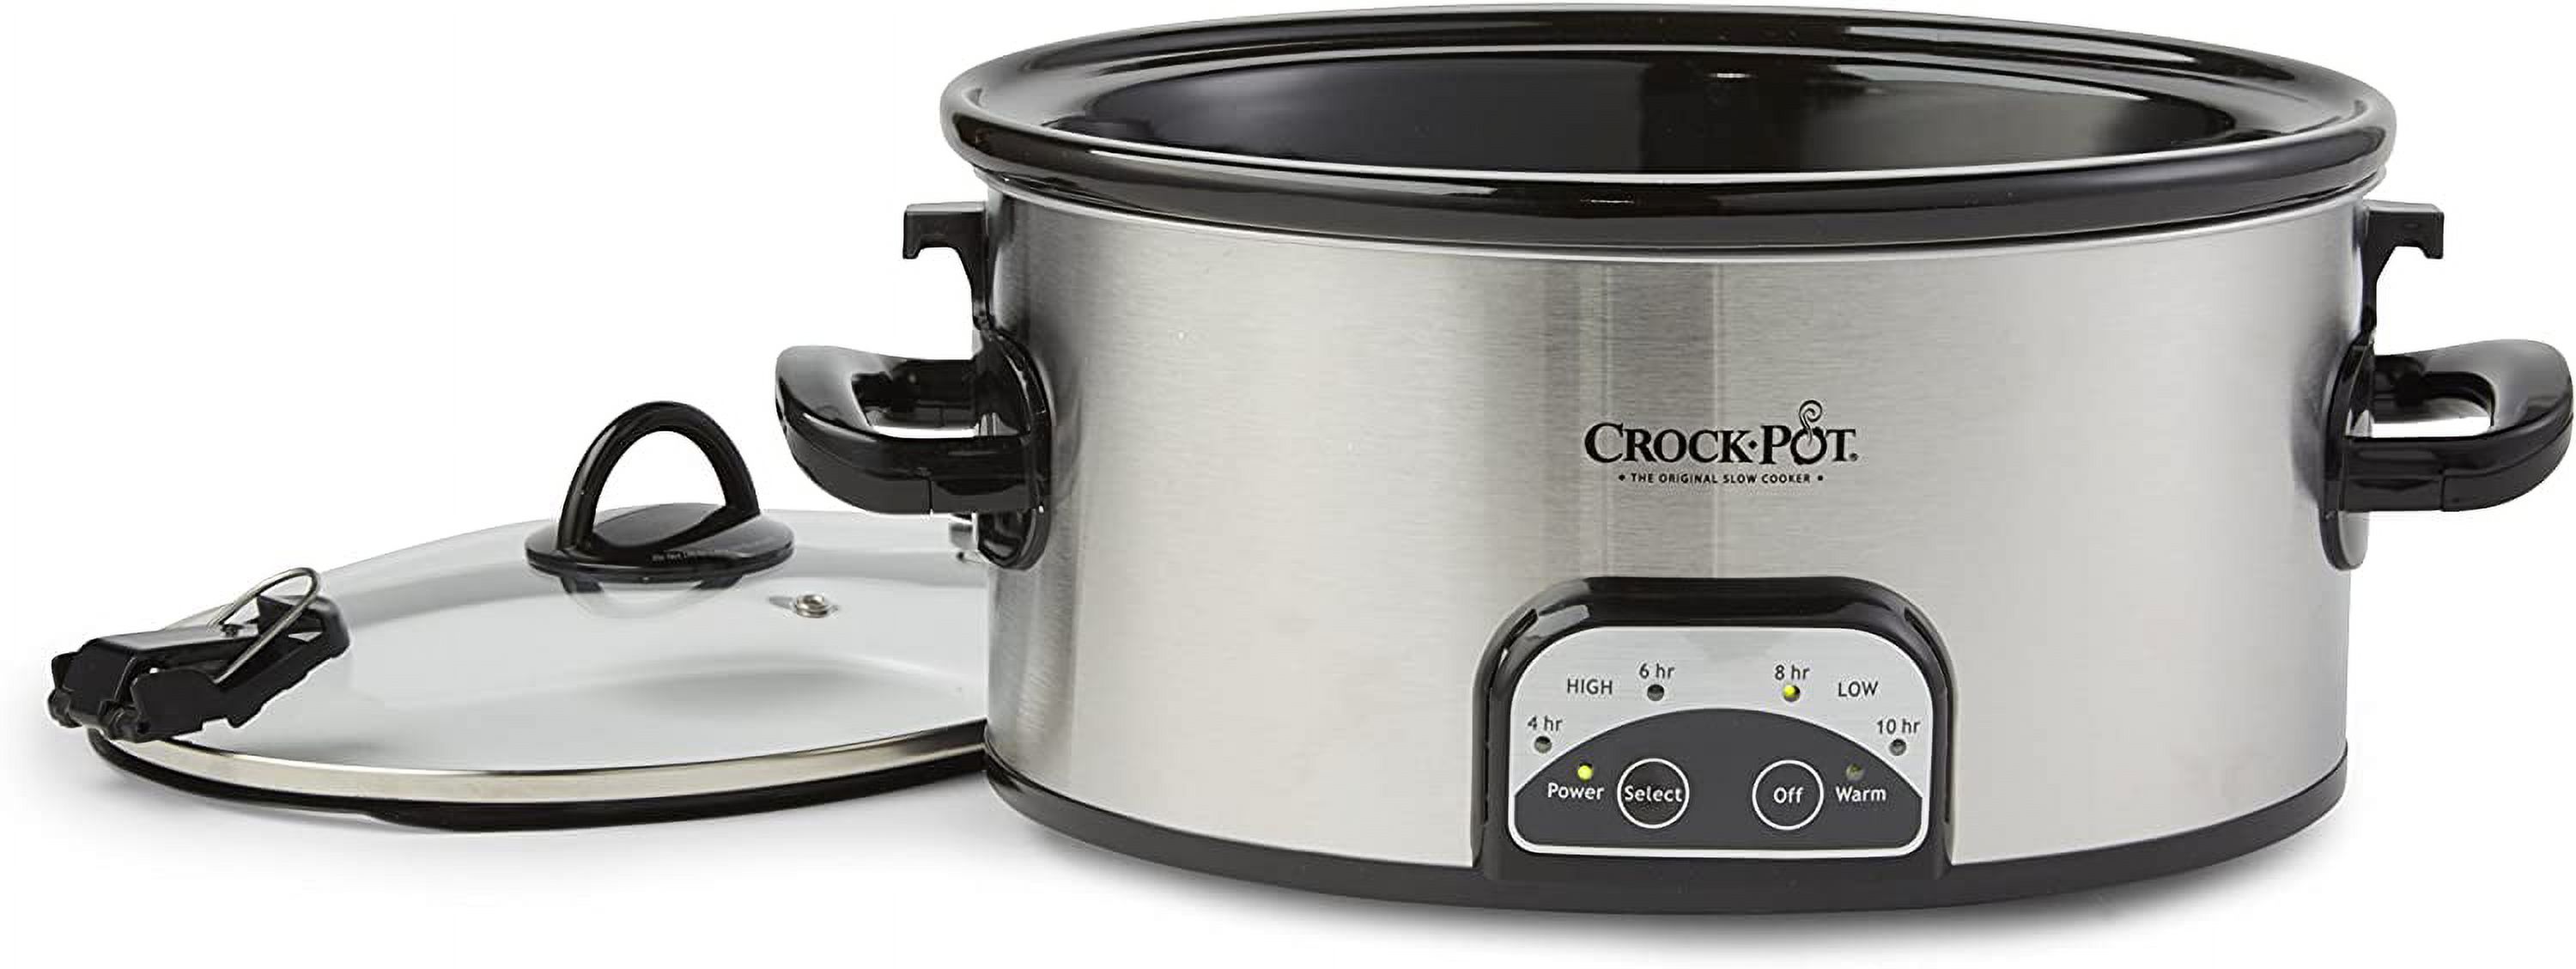 Crock-Pot 6-Quart Programmable Cook & Carry Oval Slow Cooker, Stainless Steel - image 2 of 5